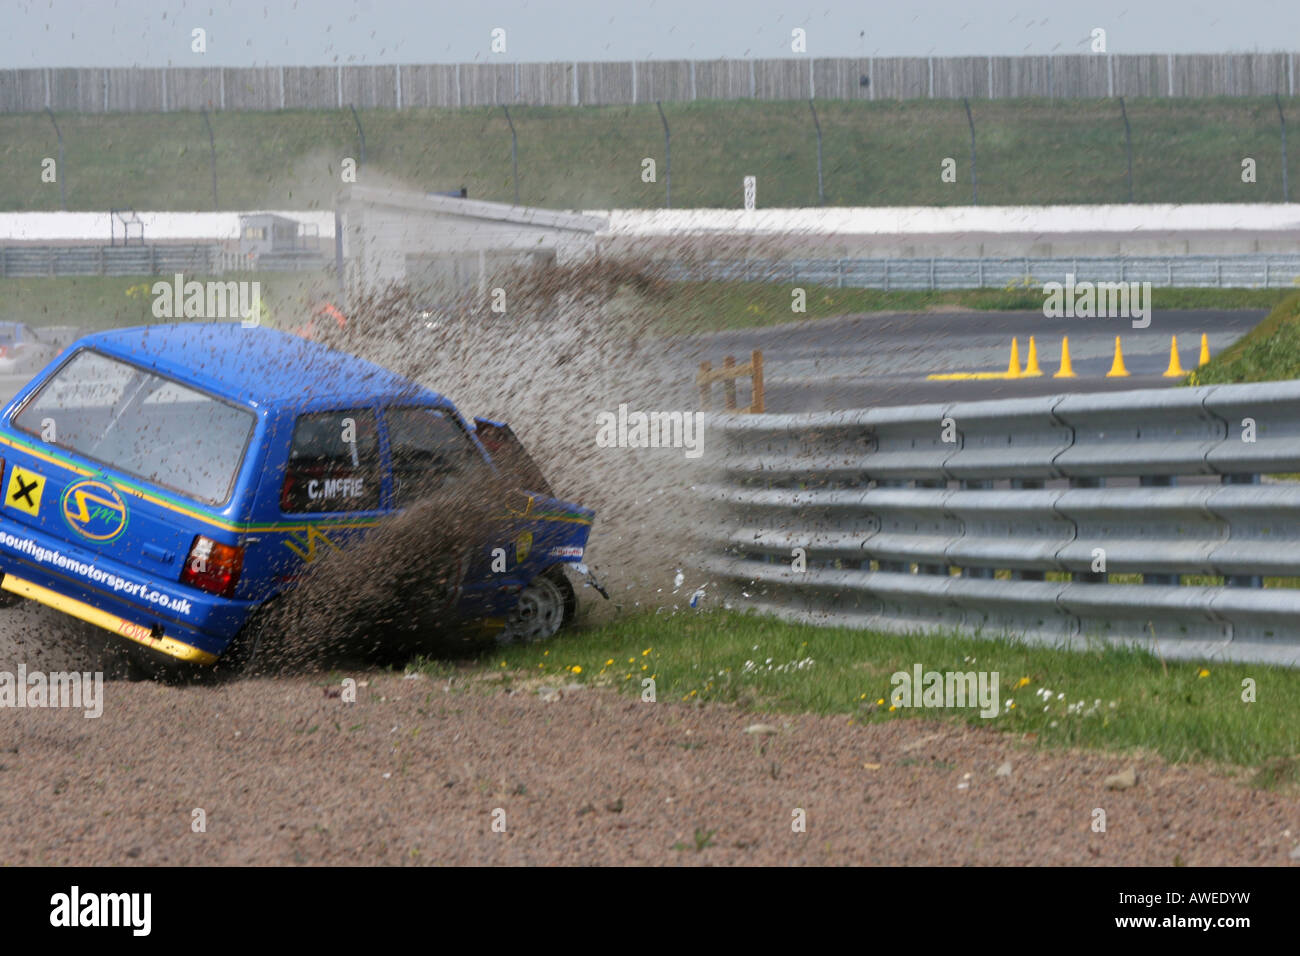 Racing Fiat Uno crashing into the barrier Stock Photo